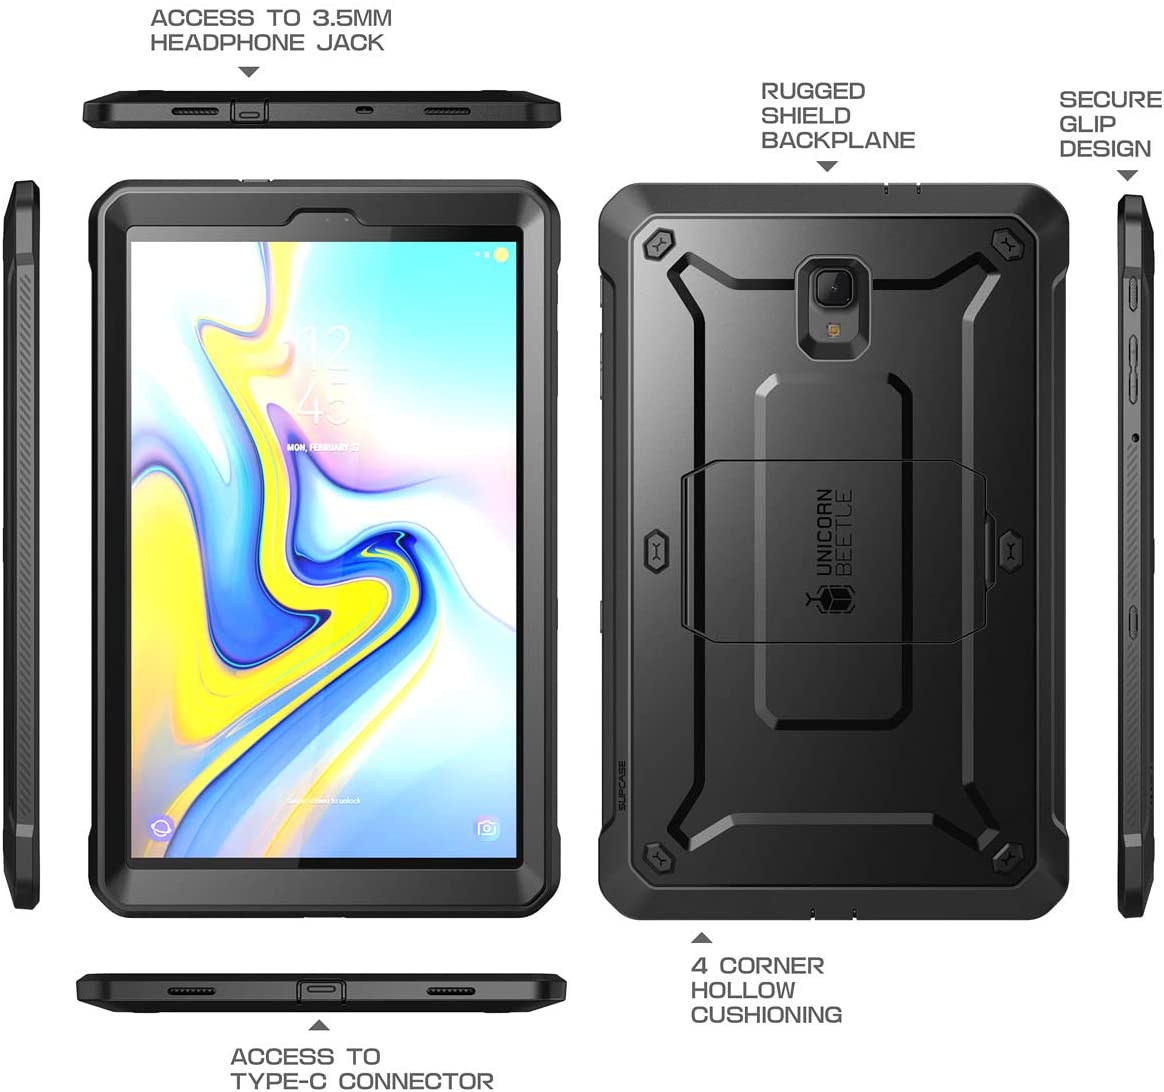 Galaxy Tab A 10.5 Case, SUPCASE Full-Body Rugged with Built-in Screen Protector Kickstand Hybrid Case for Samsung Galaxy Tab A 10.5 inch 2018 Release - e4cents